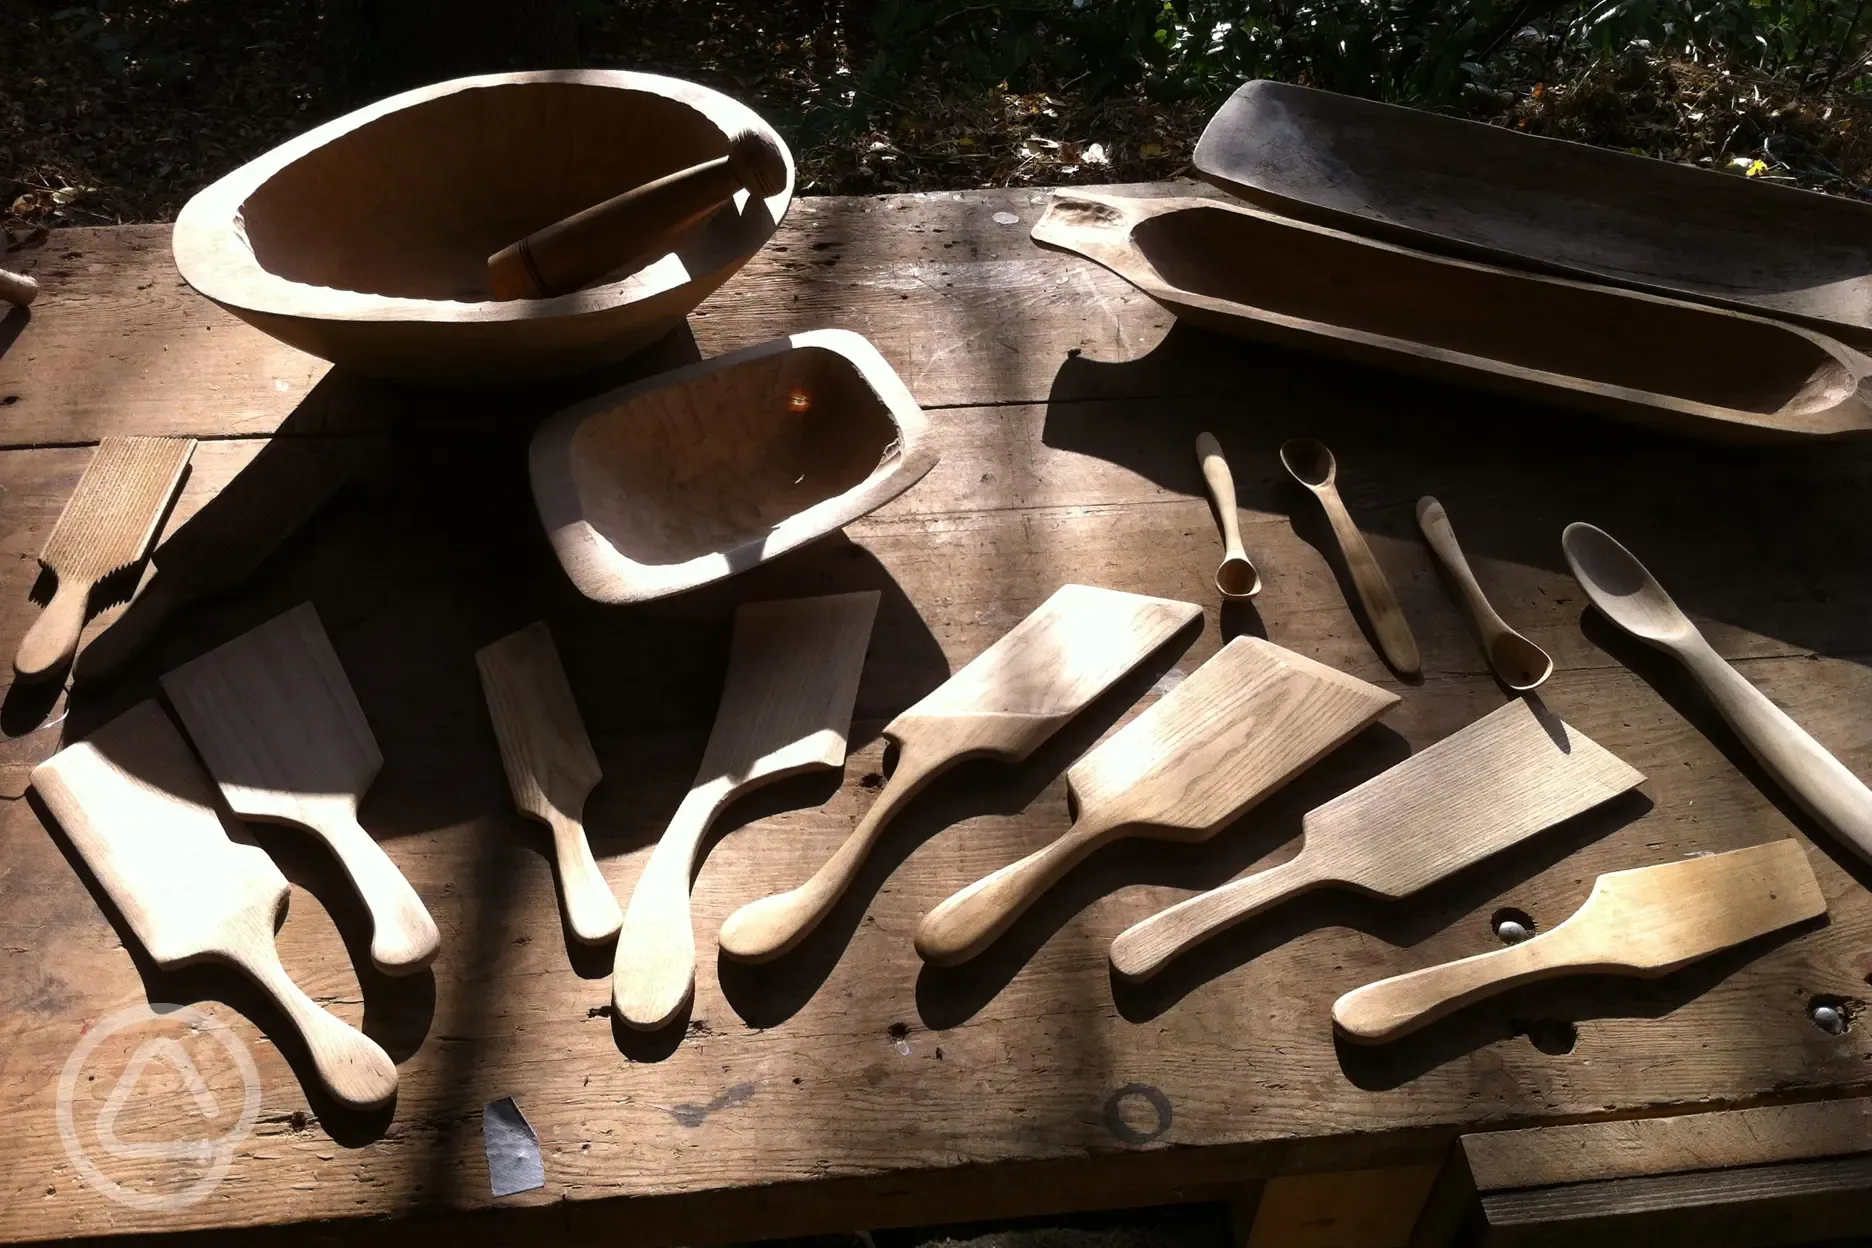 Bowl Carving and Spatula Making at Forest Garden Shovelstrode